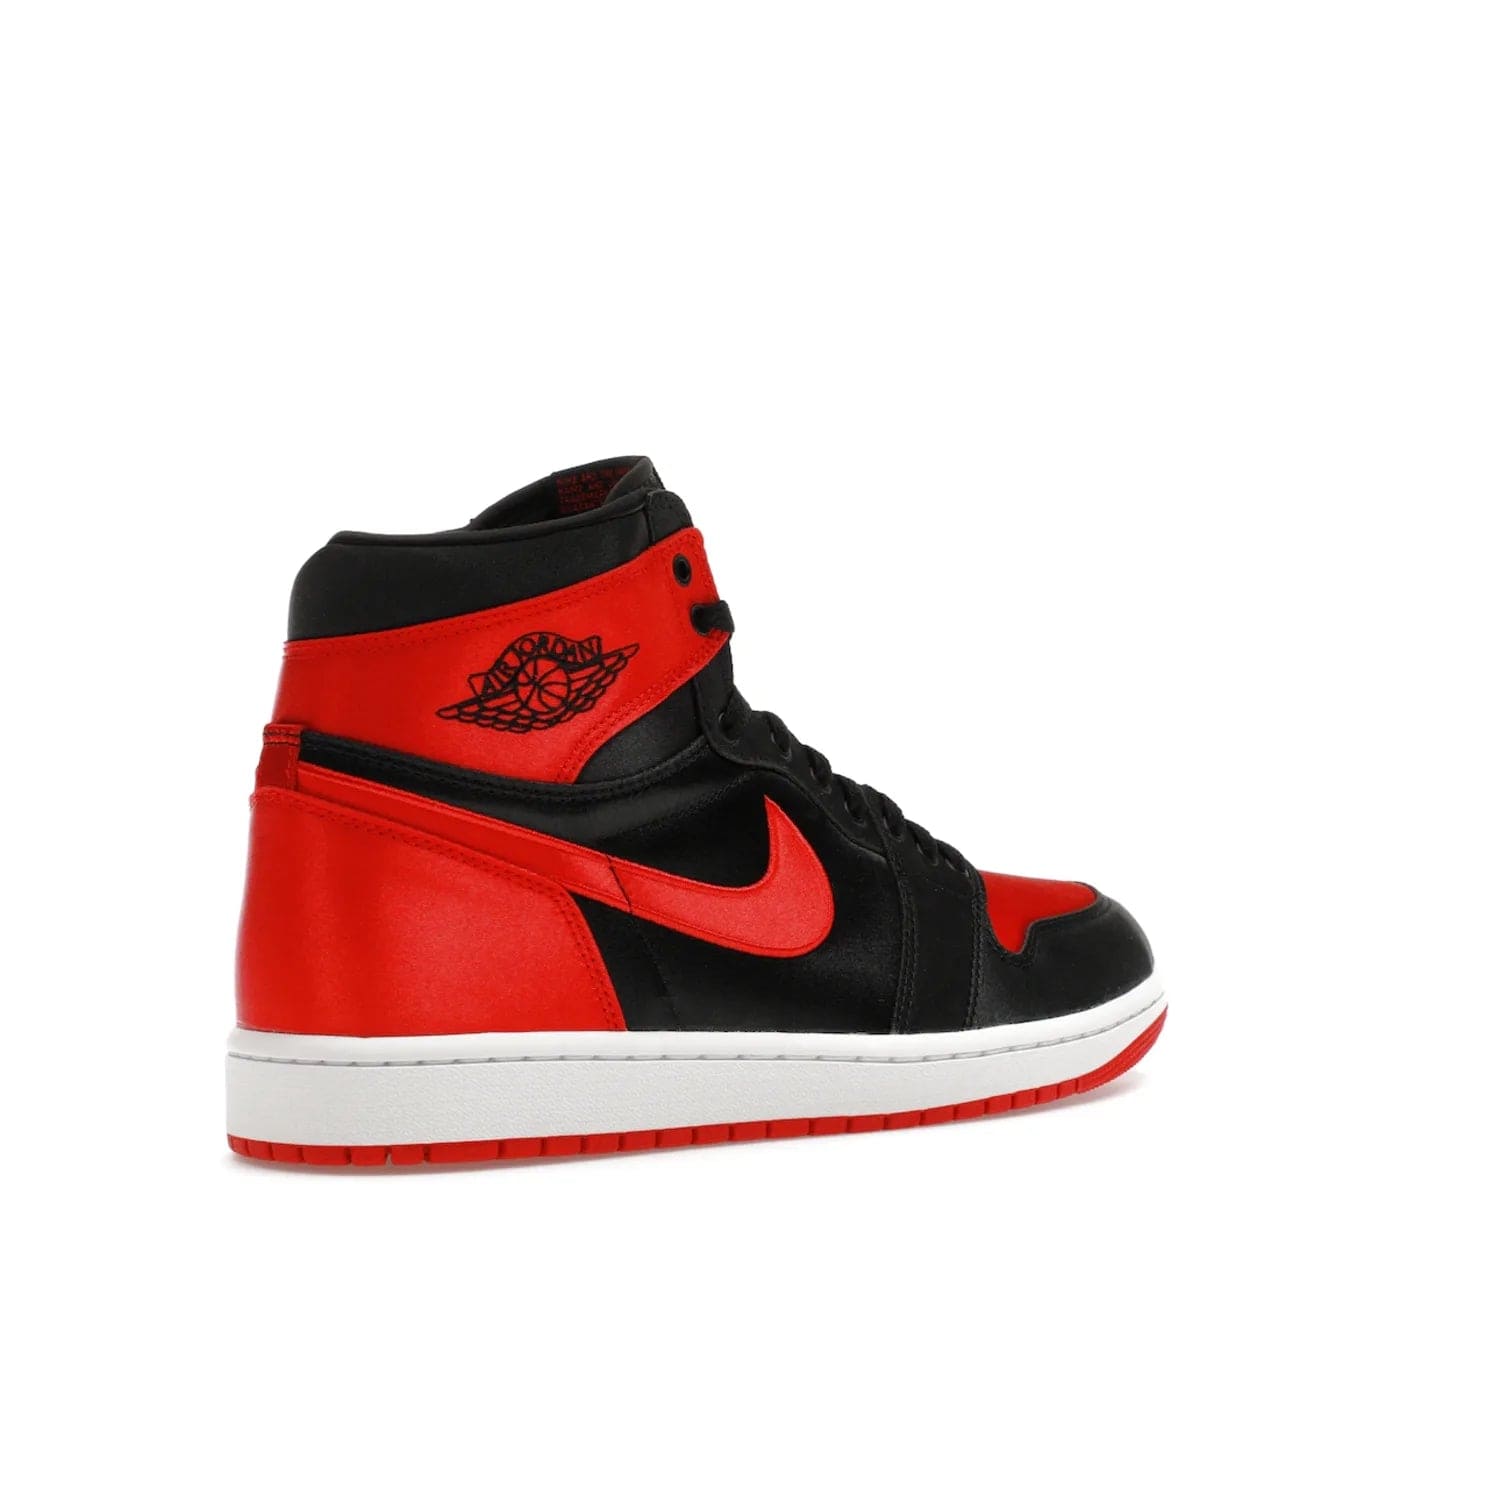 Jordan 1 Retro High OG Satin Bred (Women's) - Image 33 - Only at www.BallersClubKickz.com - Introducing the Jordan 1 Retro High OG Satin Bred (Women's). Luxe satin finish, contrasting hues & classic accents. Trending sneakers symbolizing timelessness & heritage. Make a bold statement with this iconic shoe. Available October 4, 2023.